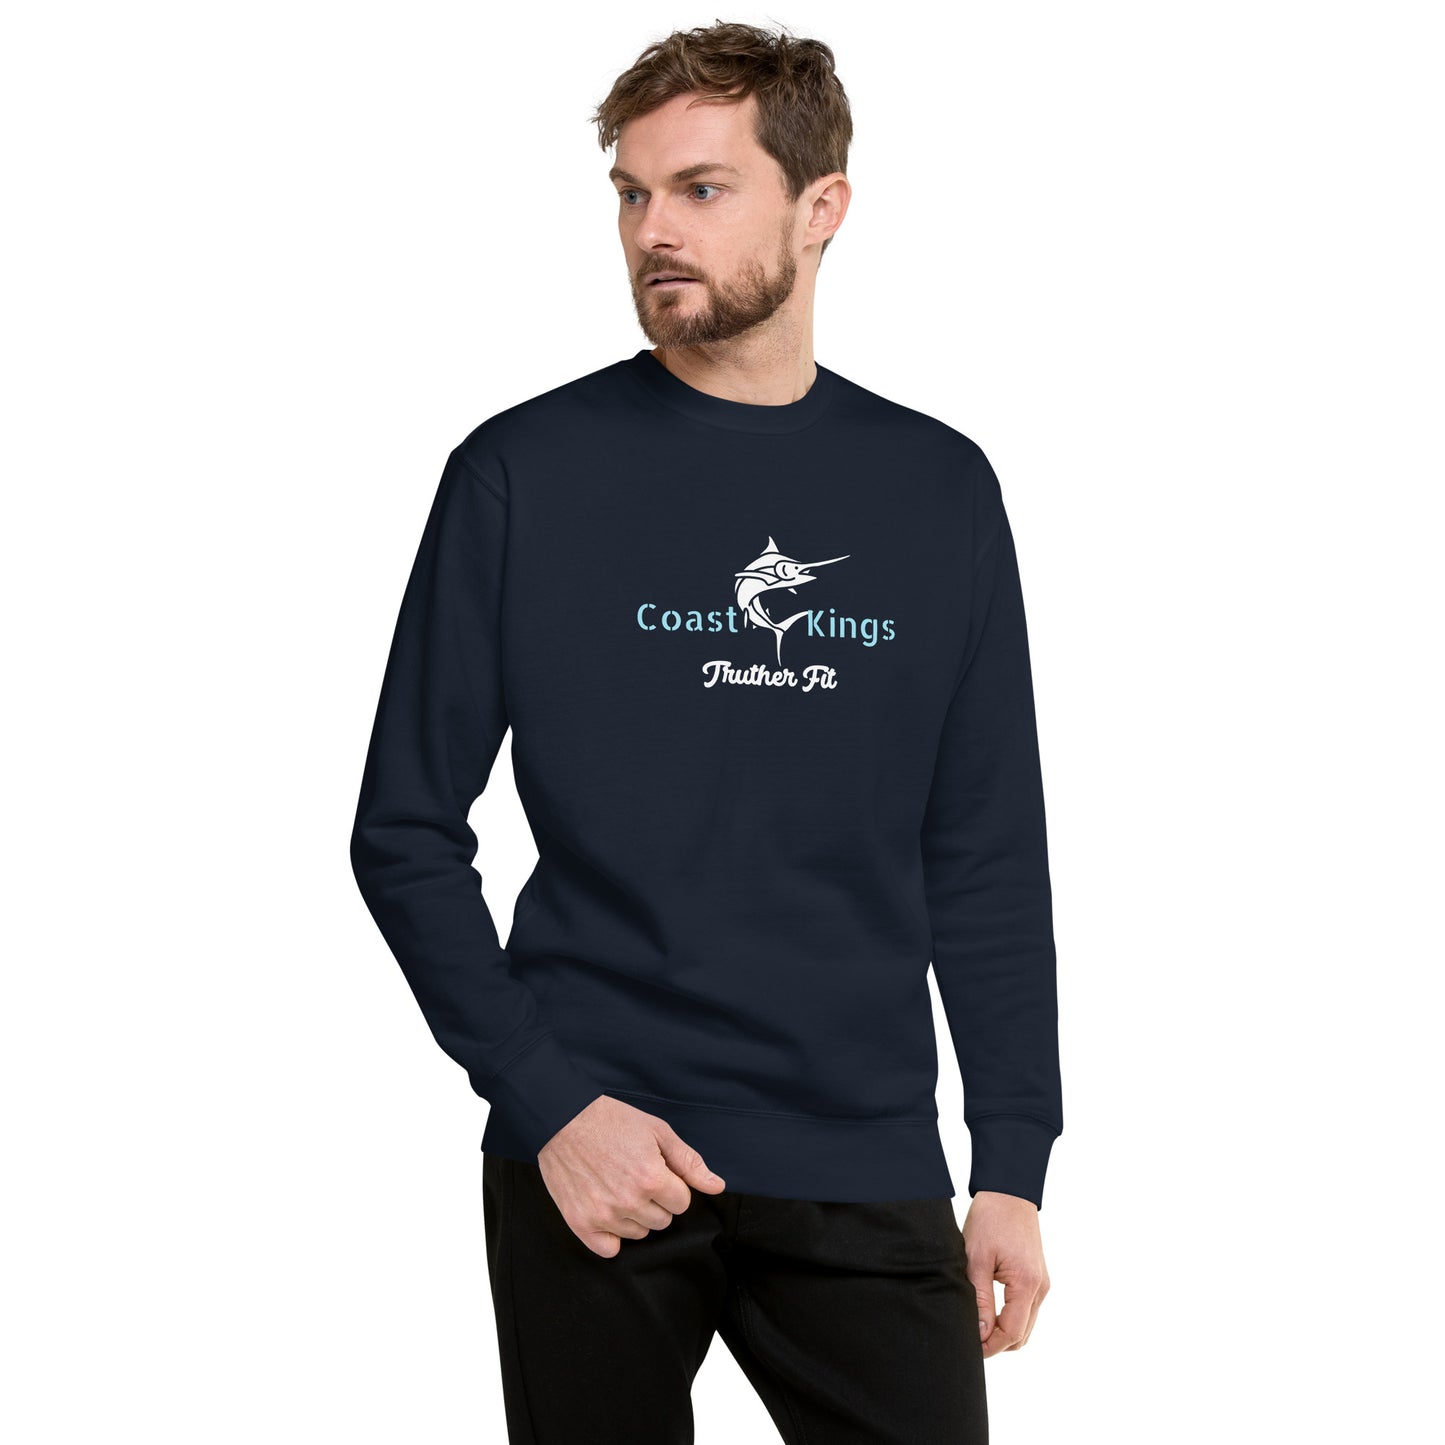 Coast King Fishing Shirt- Truther Fit